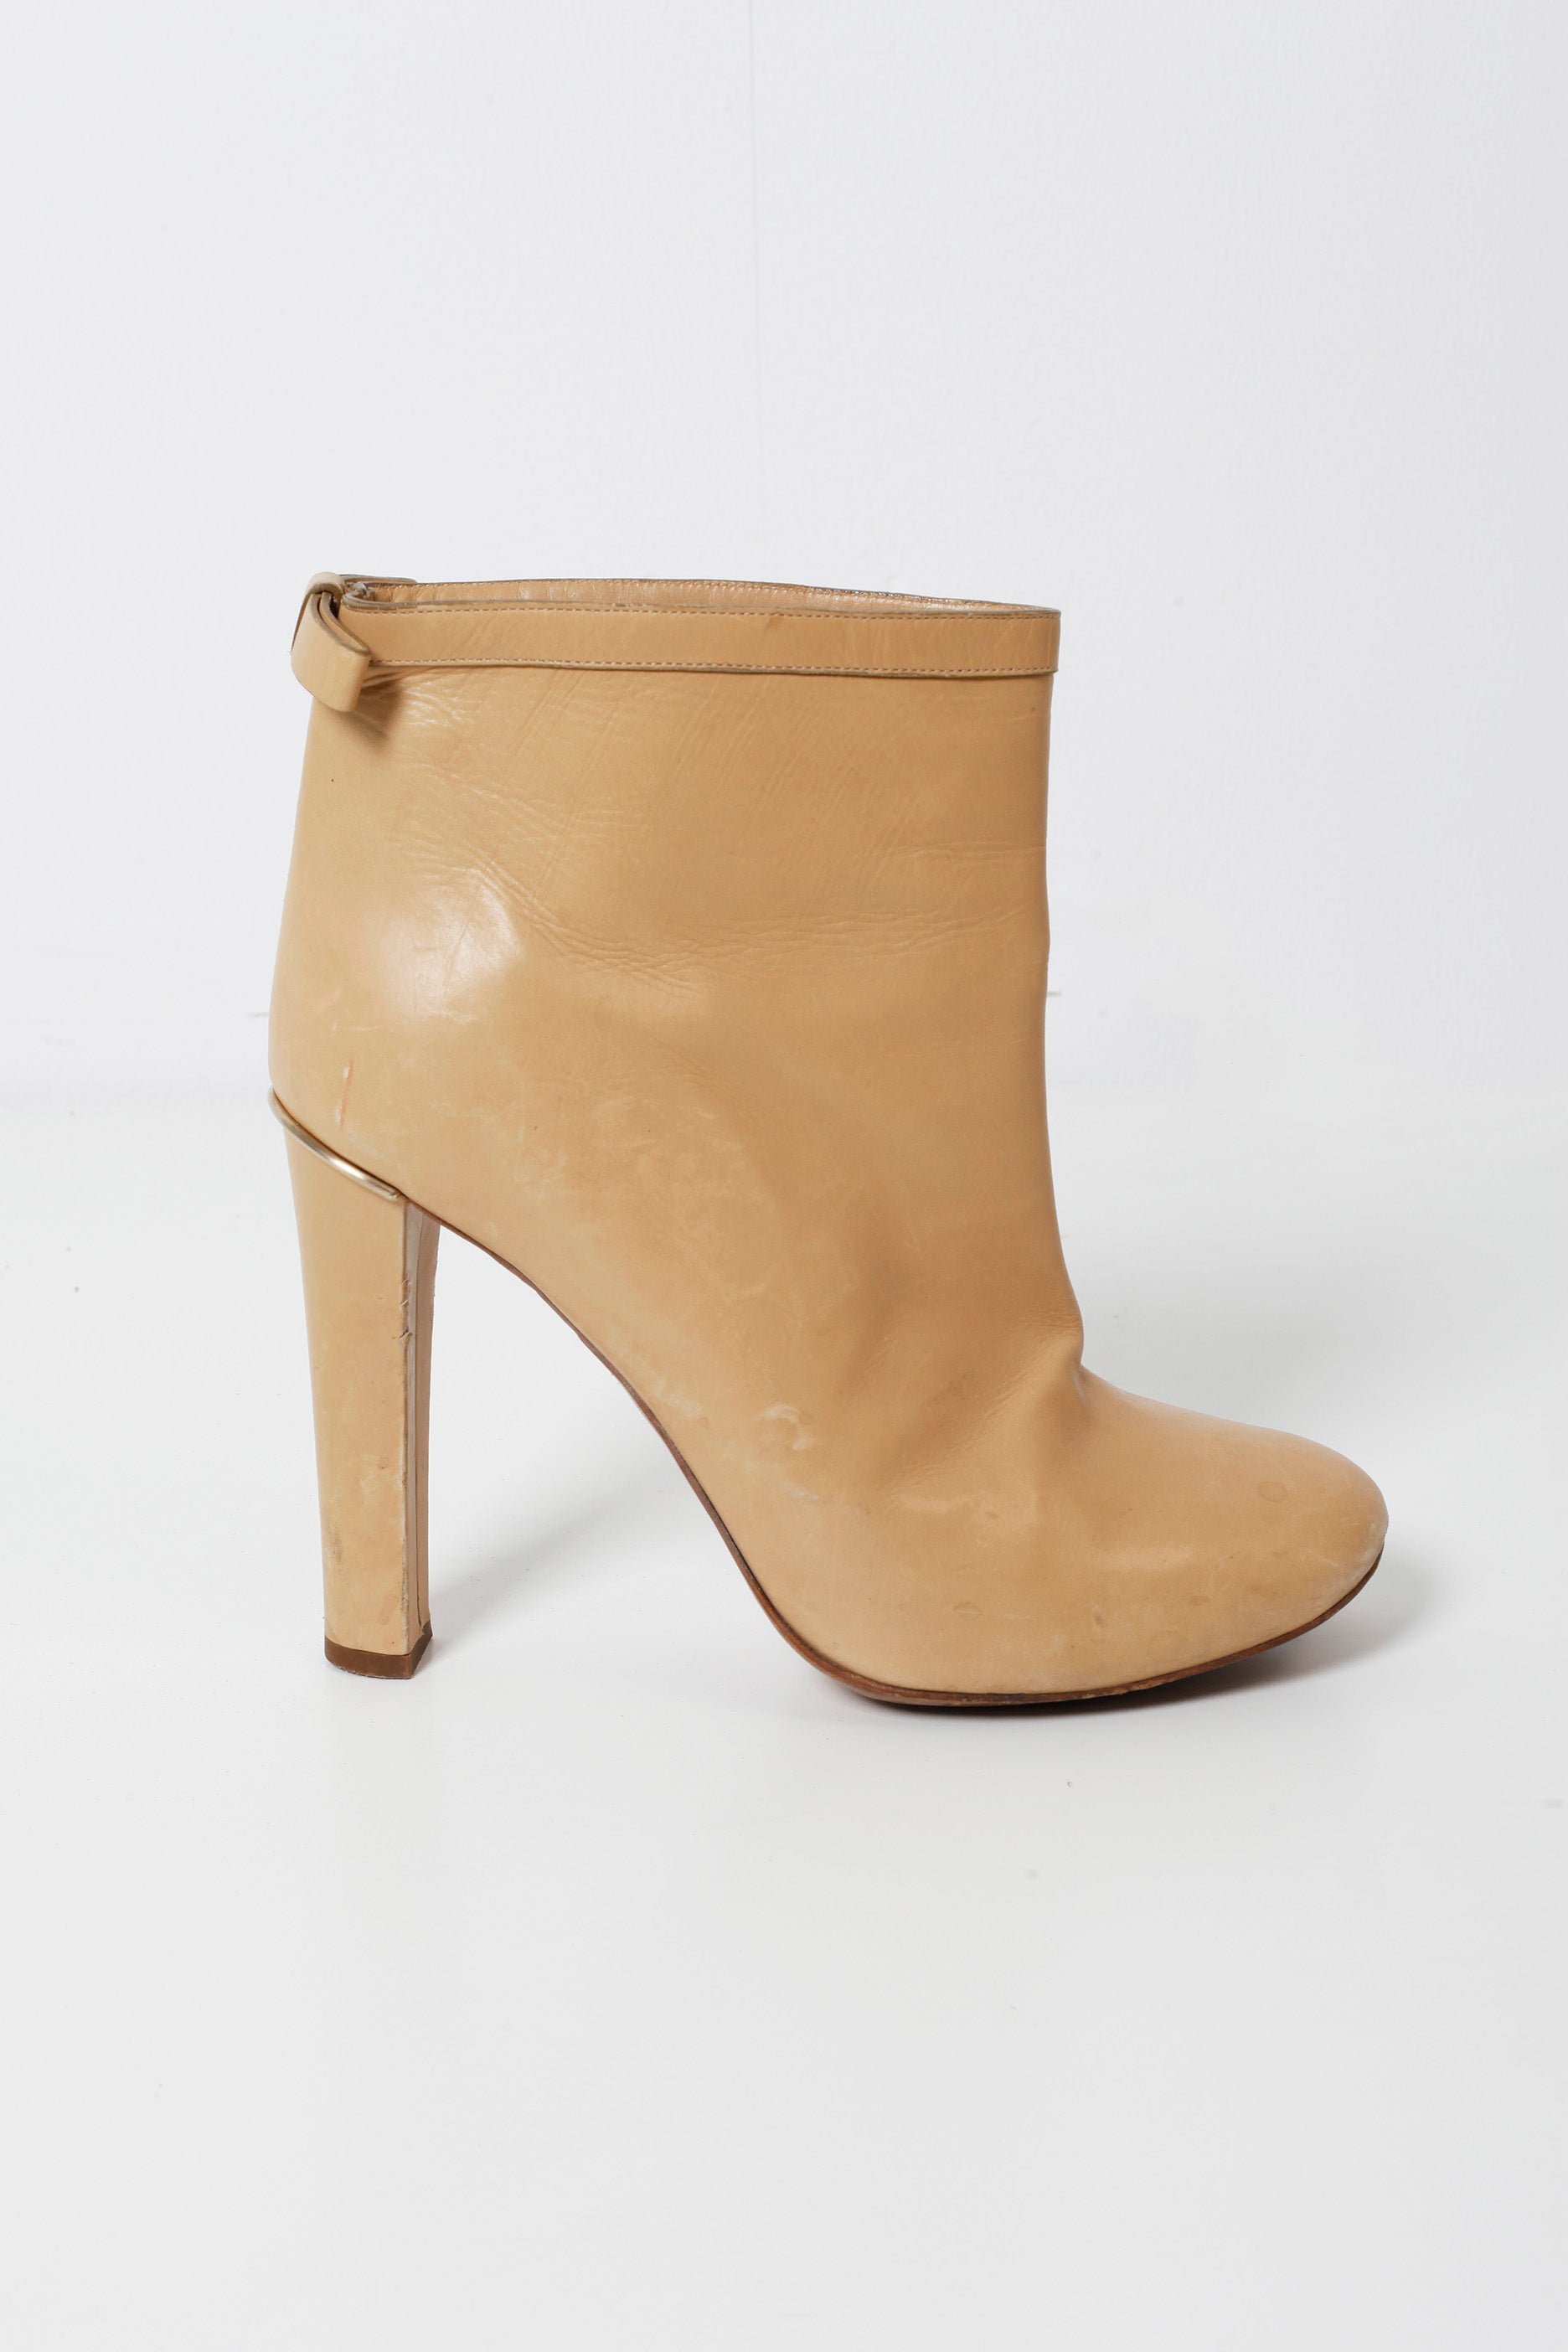 Chloé Beige Leather Ankle Boots